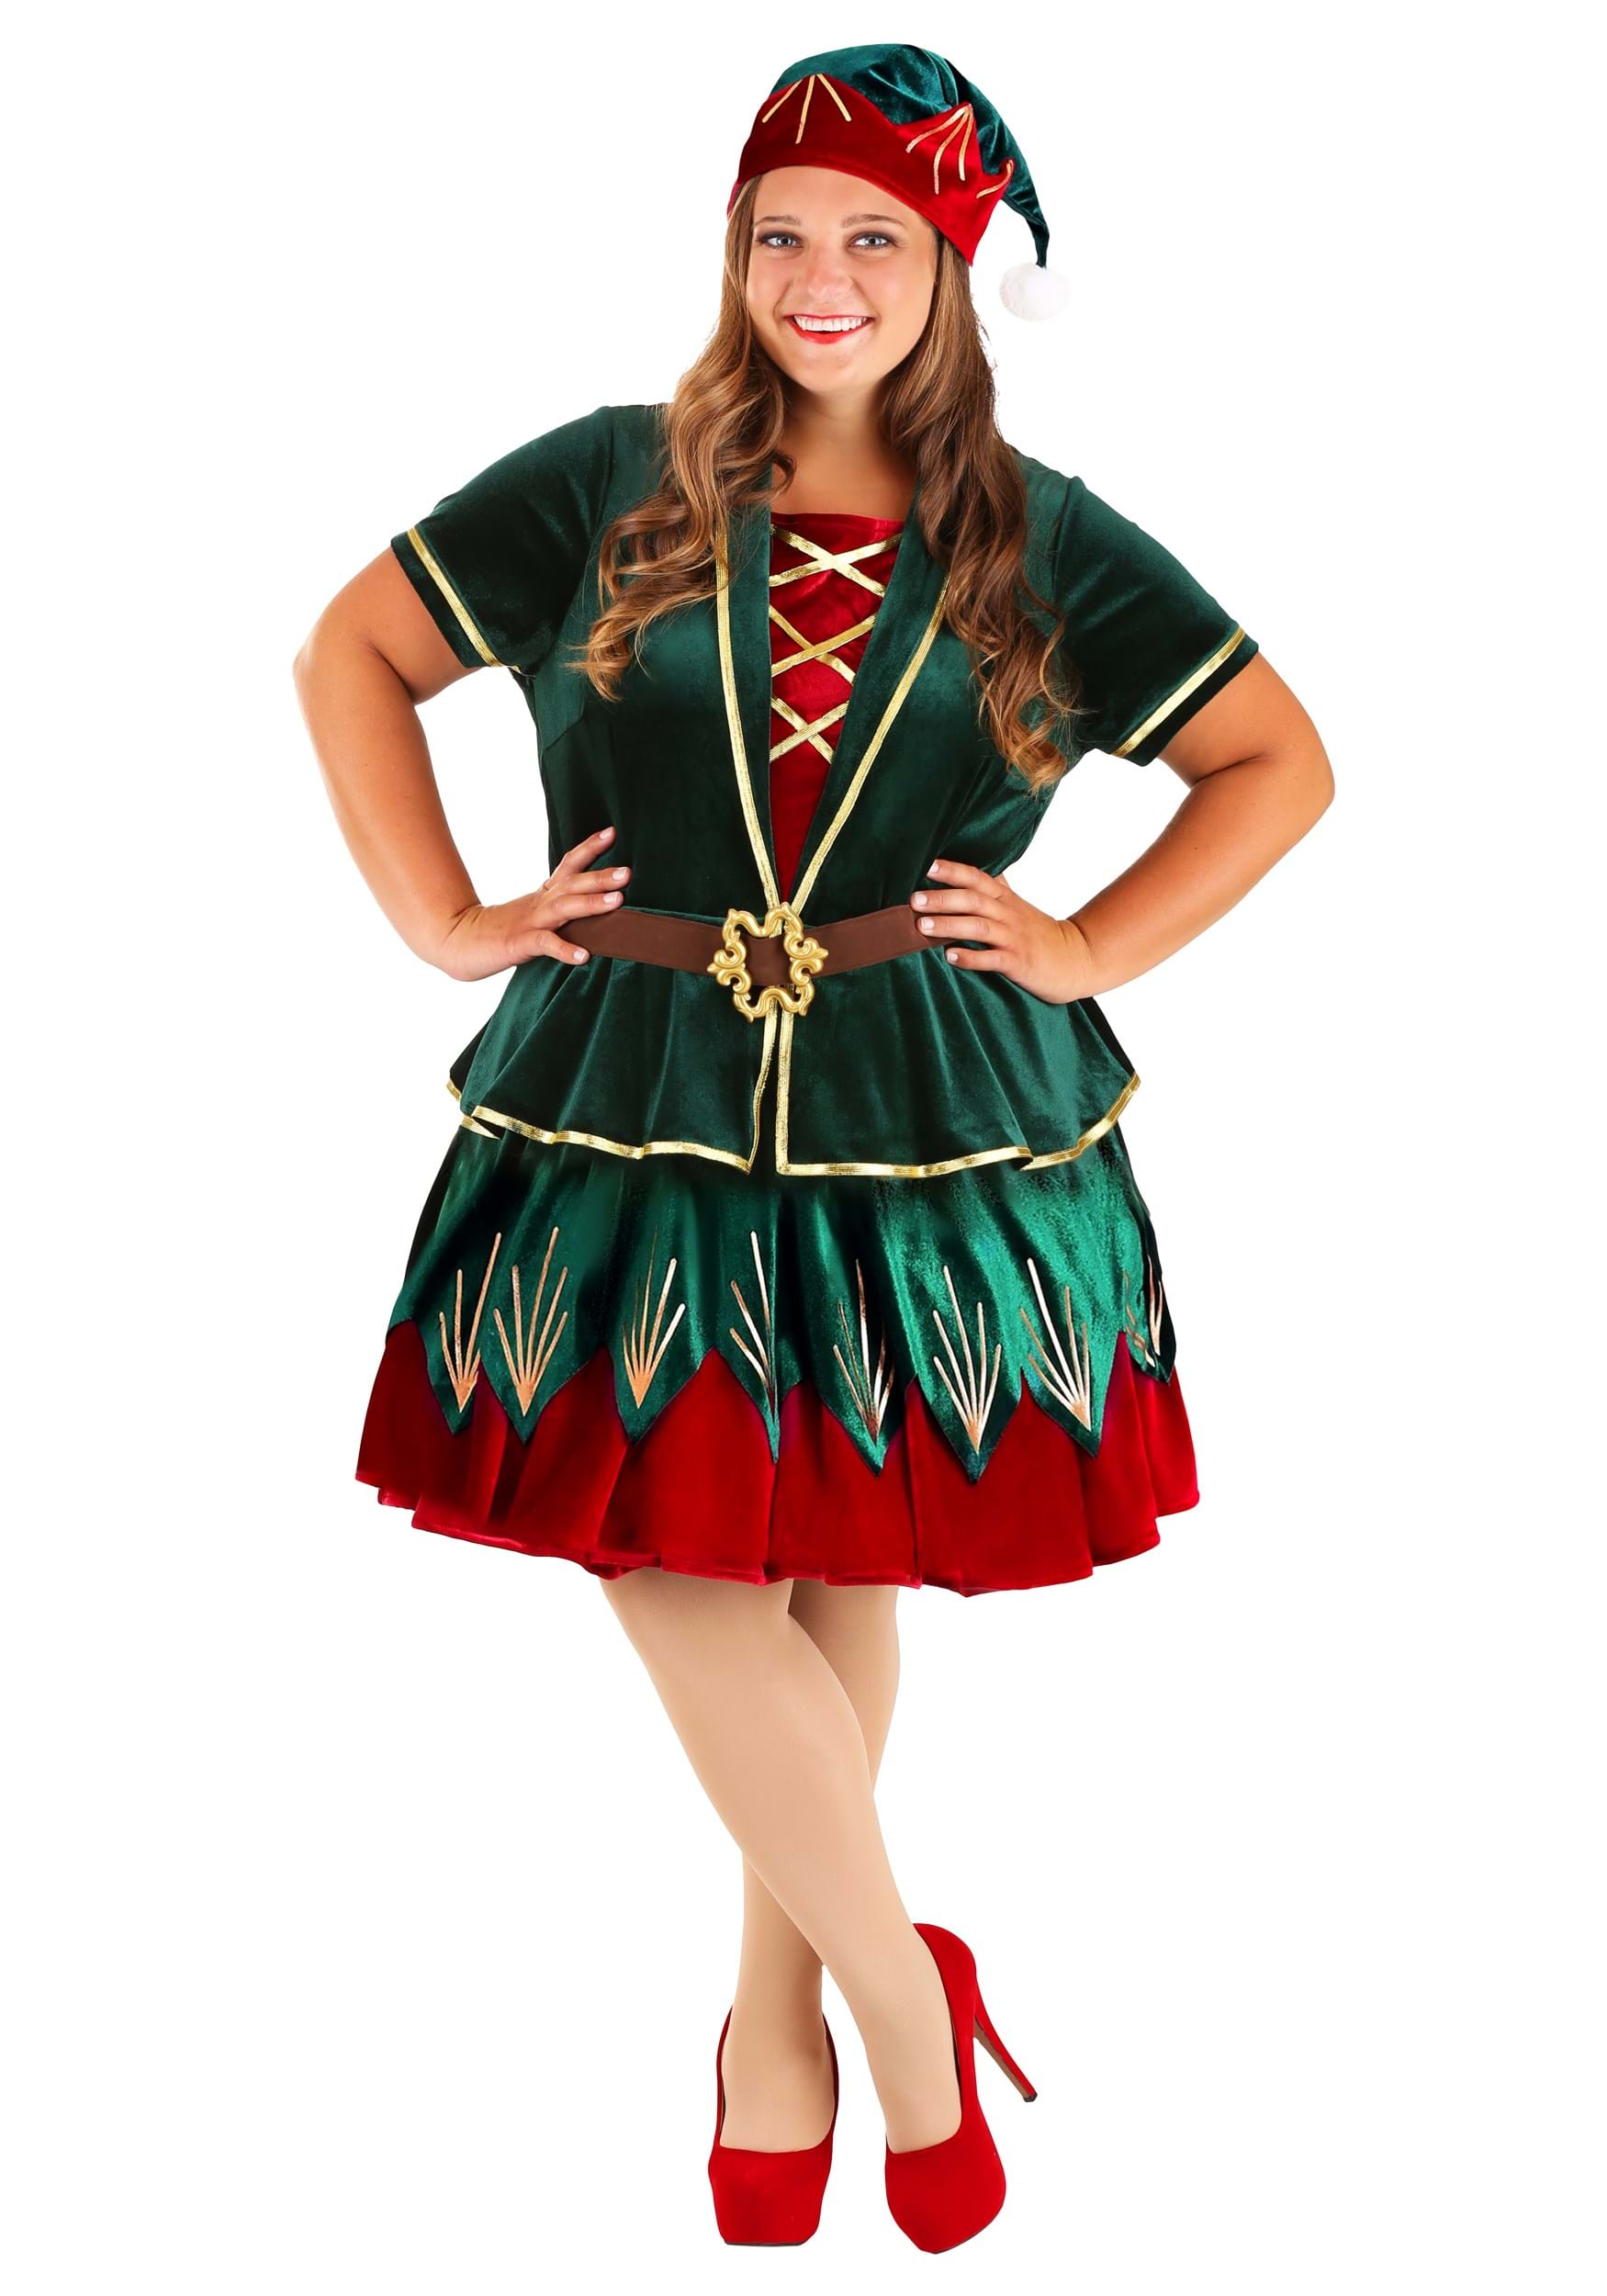 Photos - Fancy Dress Deluxe FUN Costumes Plus Size  Holiday Elf Costume for Women Green/Red 